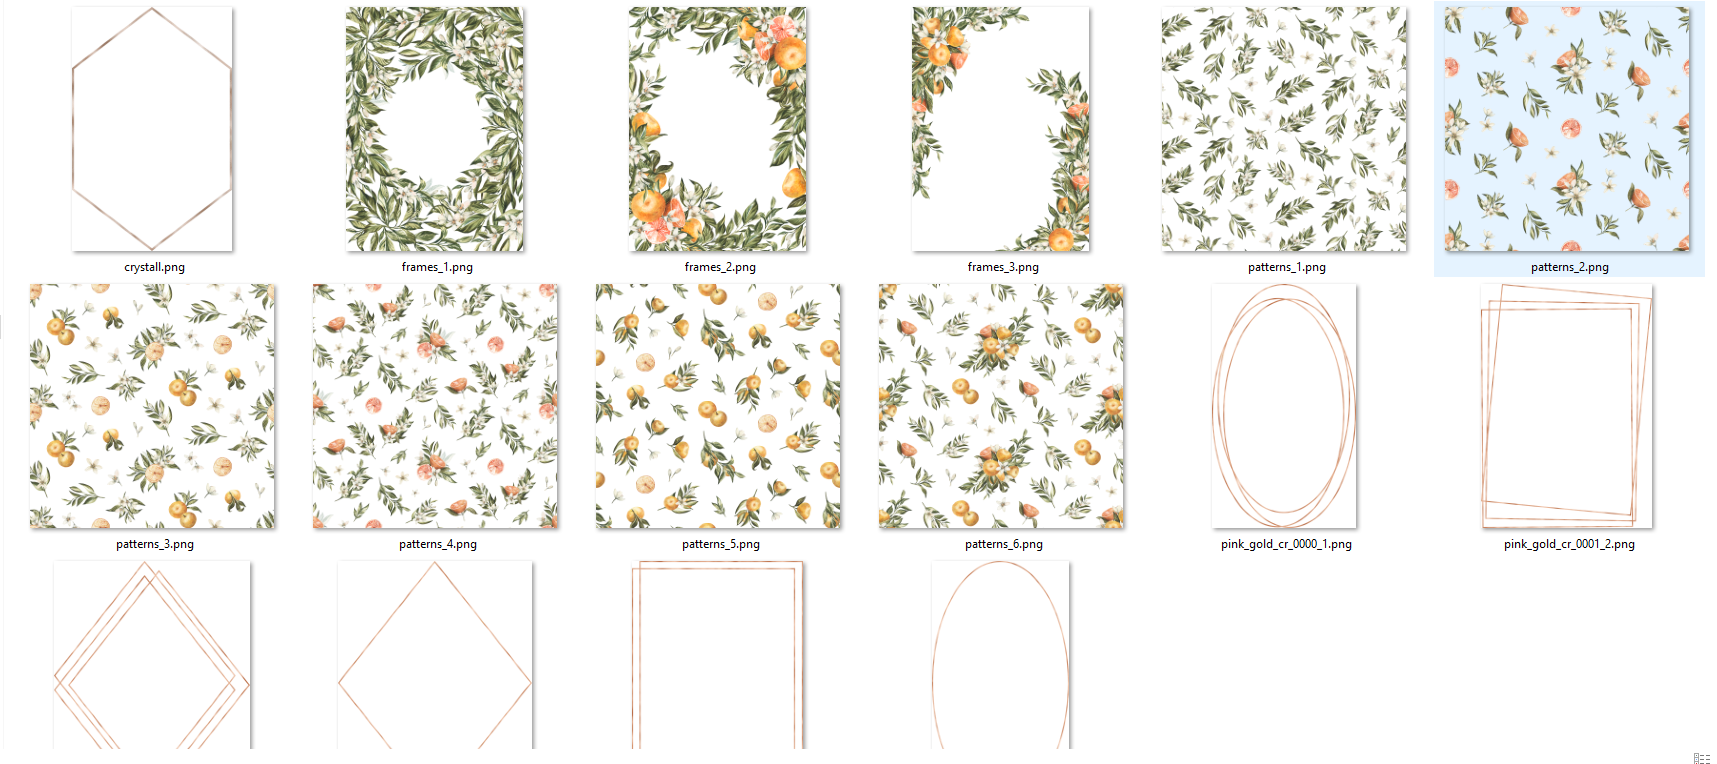 Cut-out png images of different flowers and flower motifs with the highest quality for printing on materials